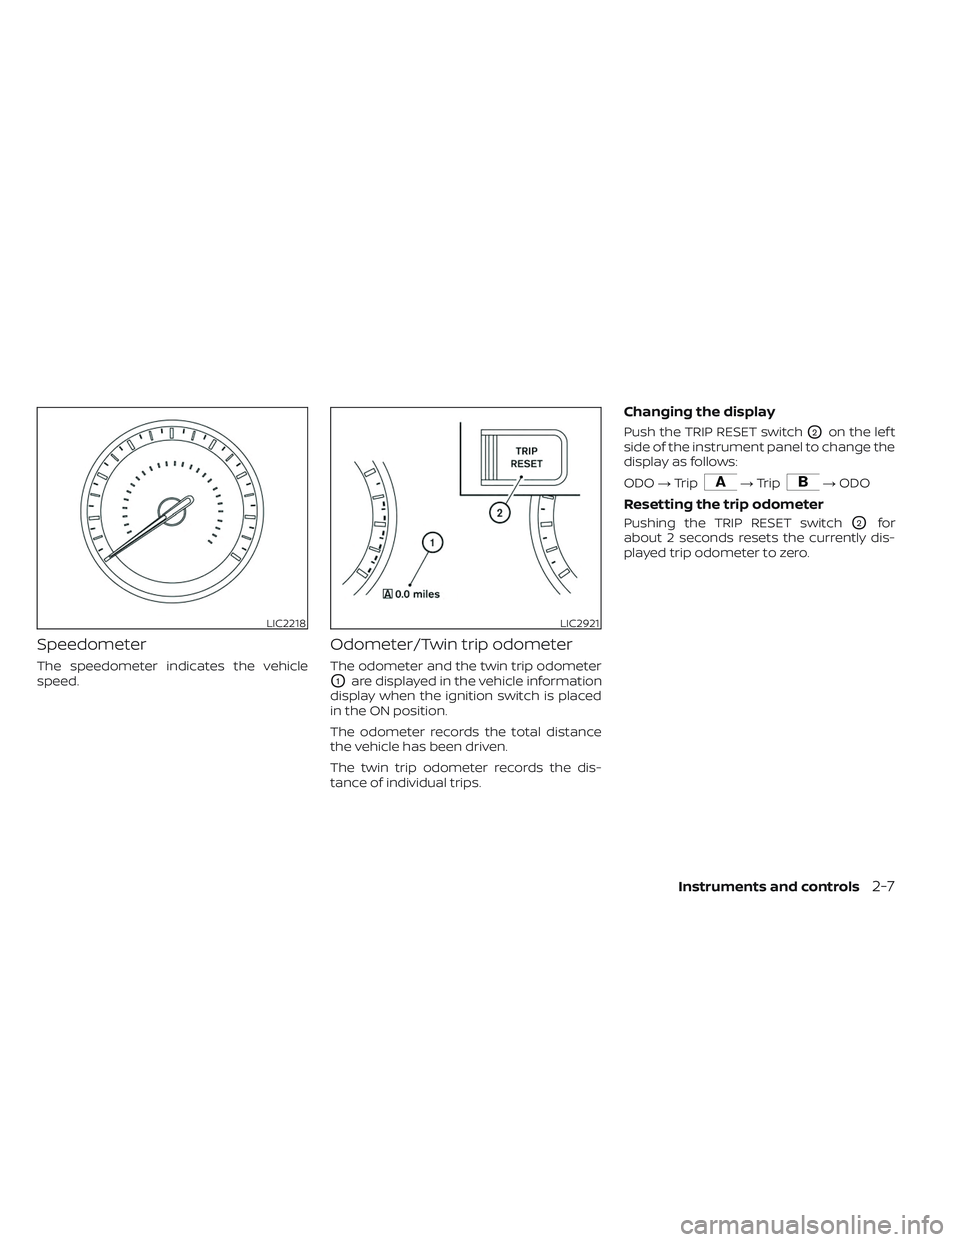 NISSAN TITAN 2022  Owners Manual Speedometer
The speedometer indicates the vehicle
speed.
Odometer/Twin trip odometer
The odometer and the twin trip odometer
O1are displayed in the vehicle information
display when the ignition switch